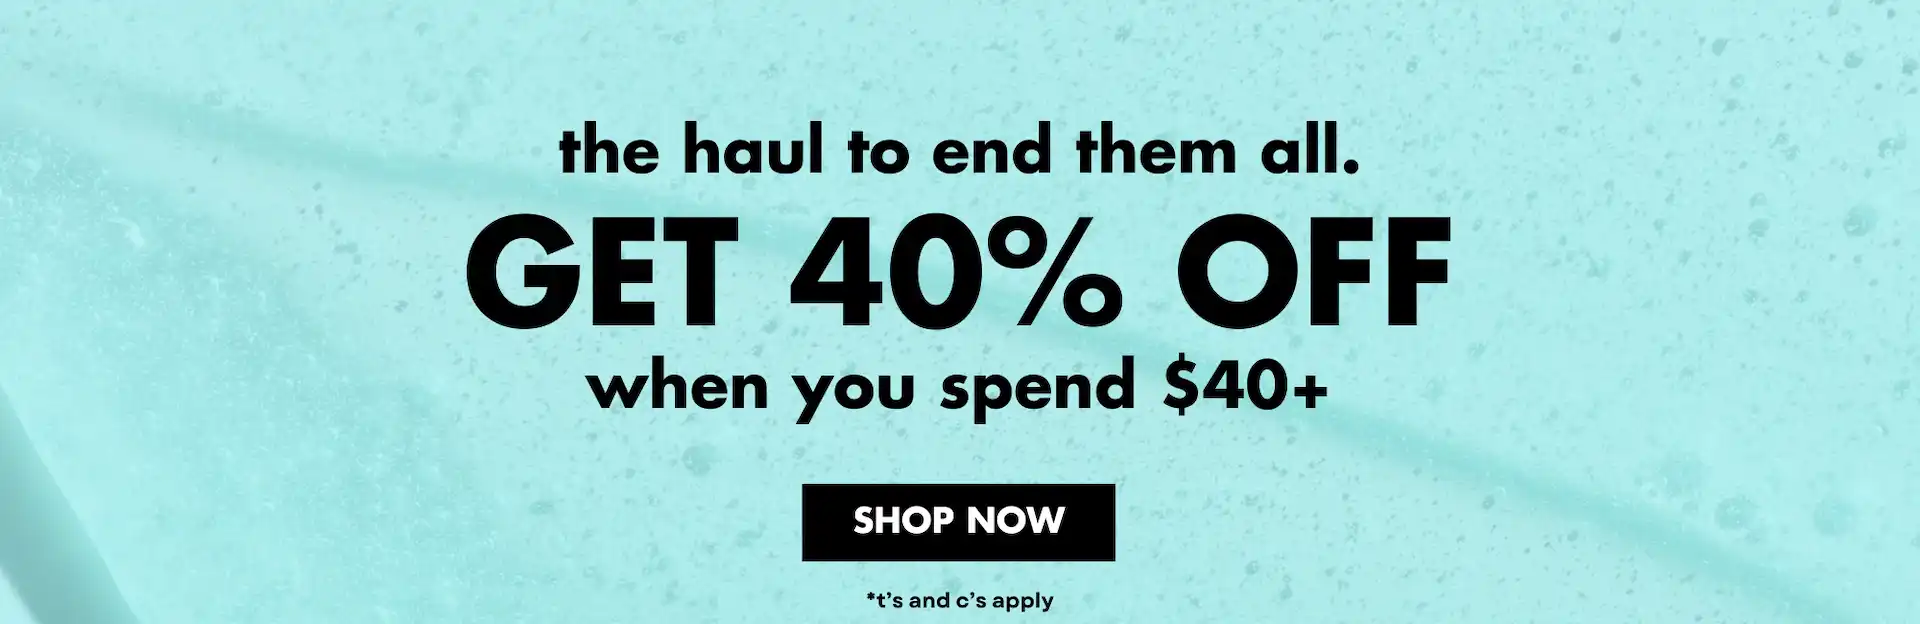 Get 40% OFF $40+ on all vegan products at E.L.F Cosmetics